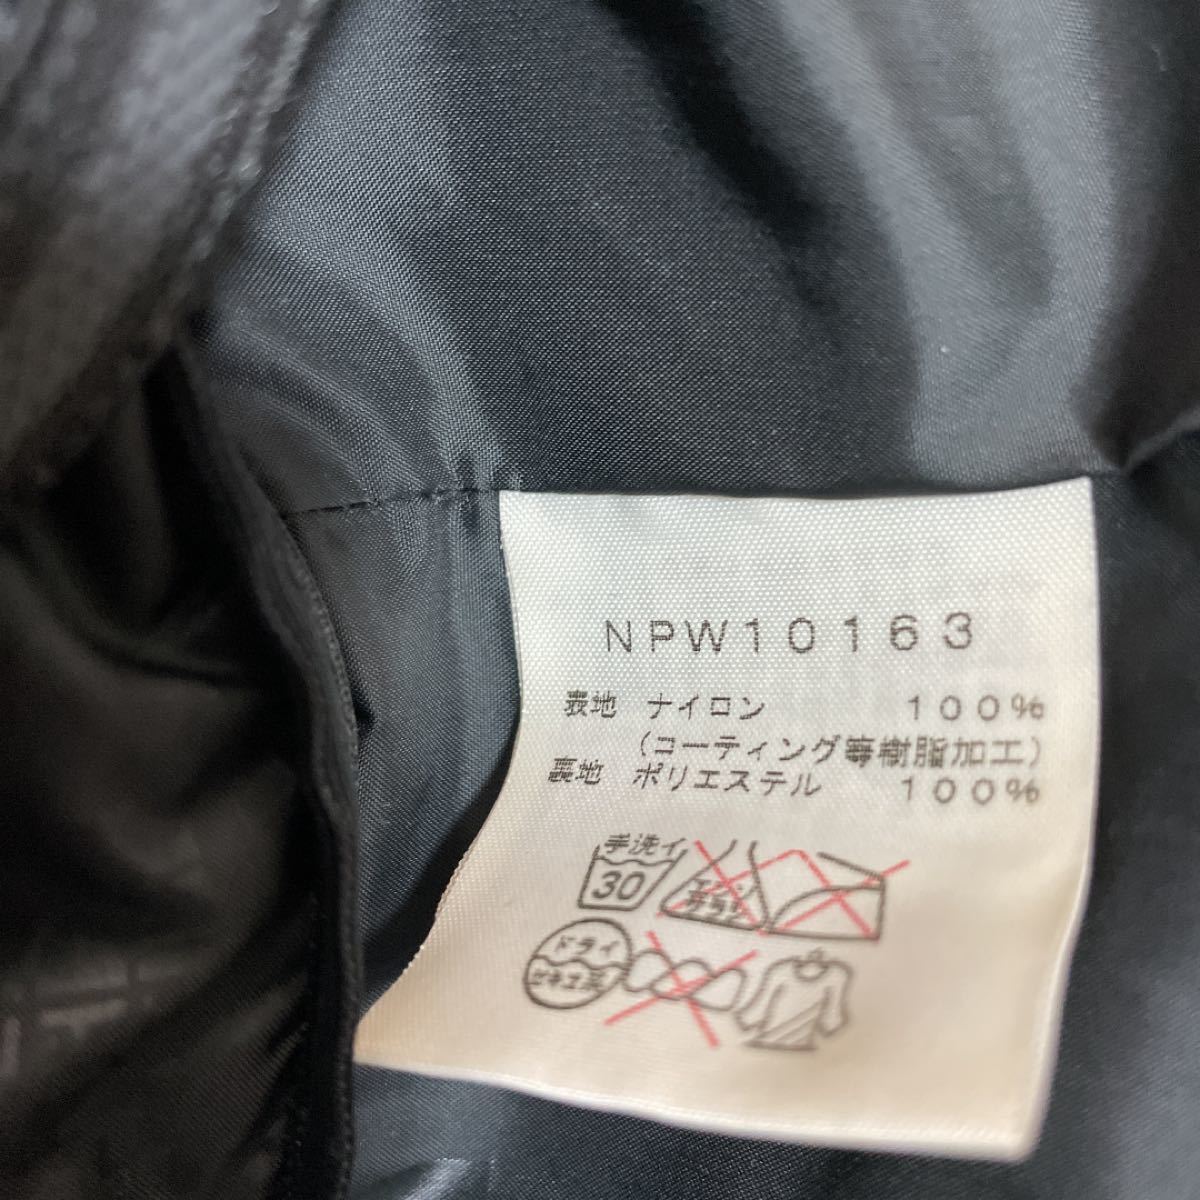 THE NORTH FACE   スクープJACKET